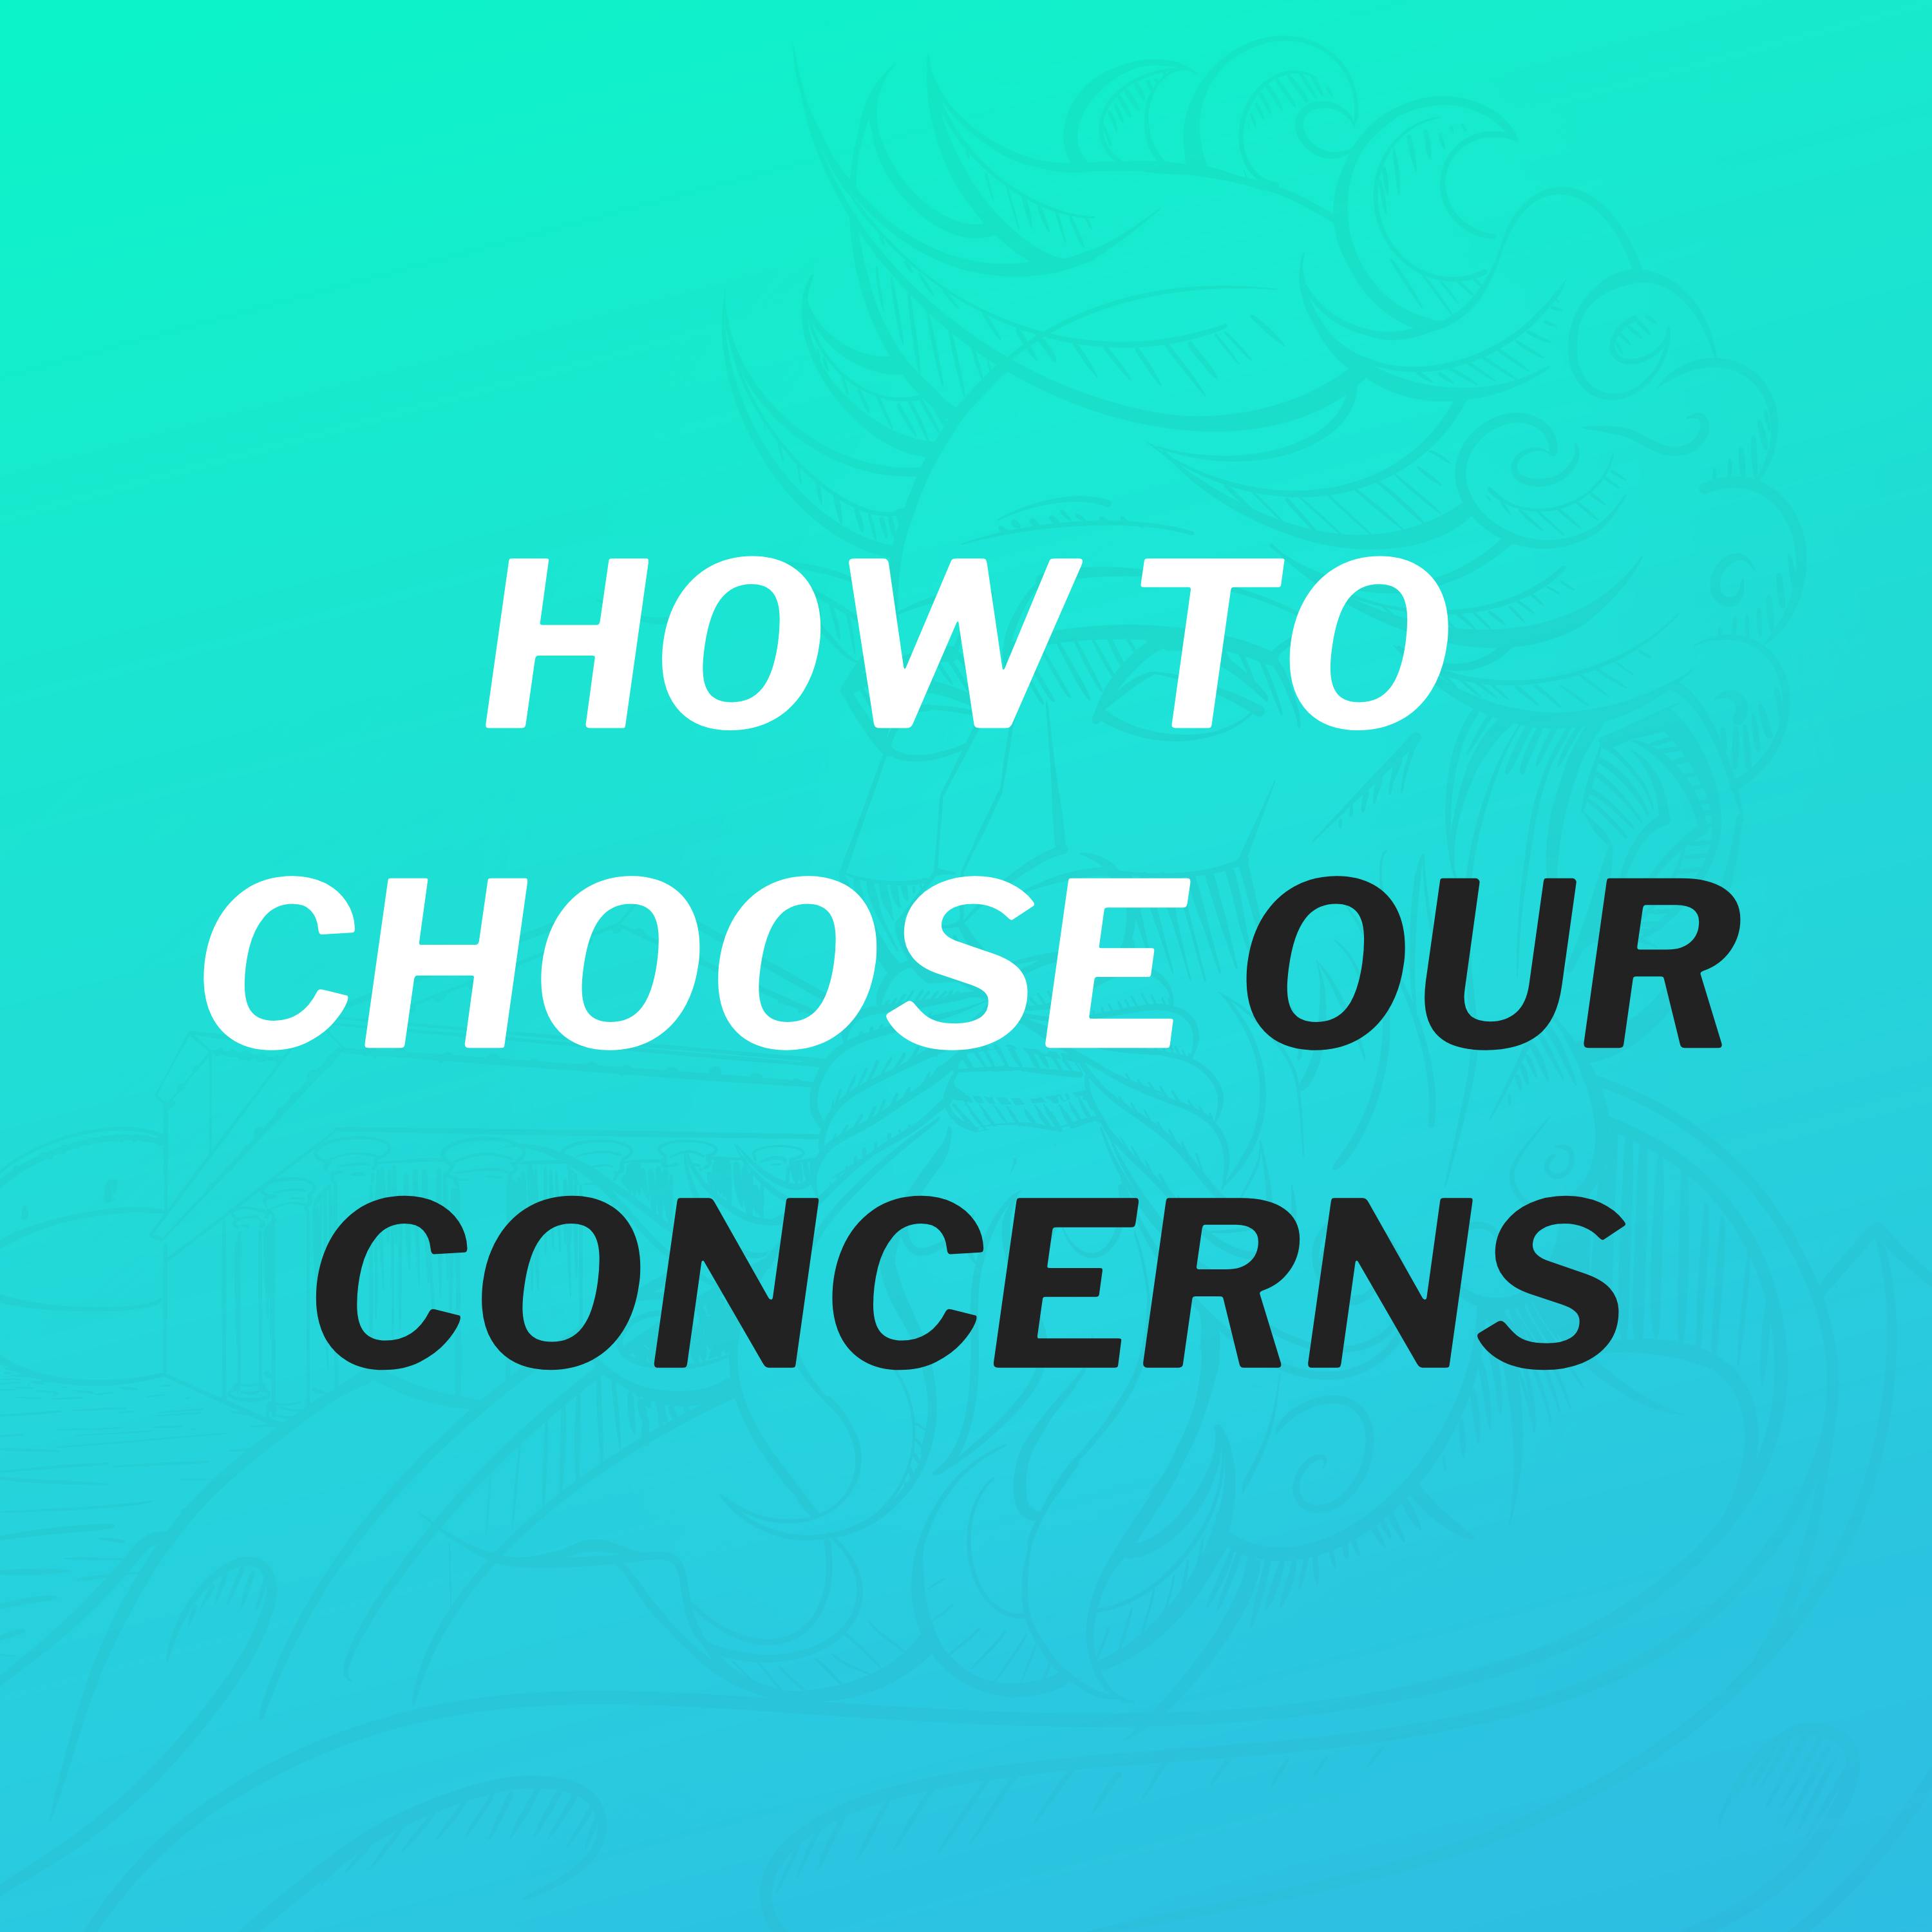 How To Choose Our Concerns